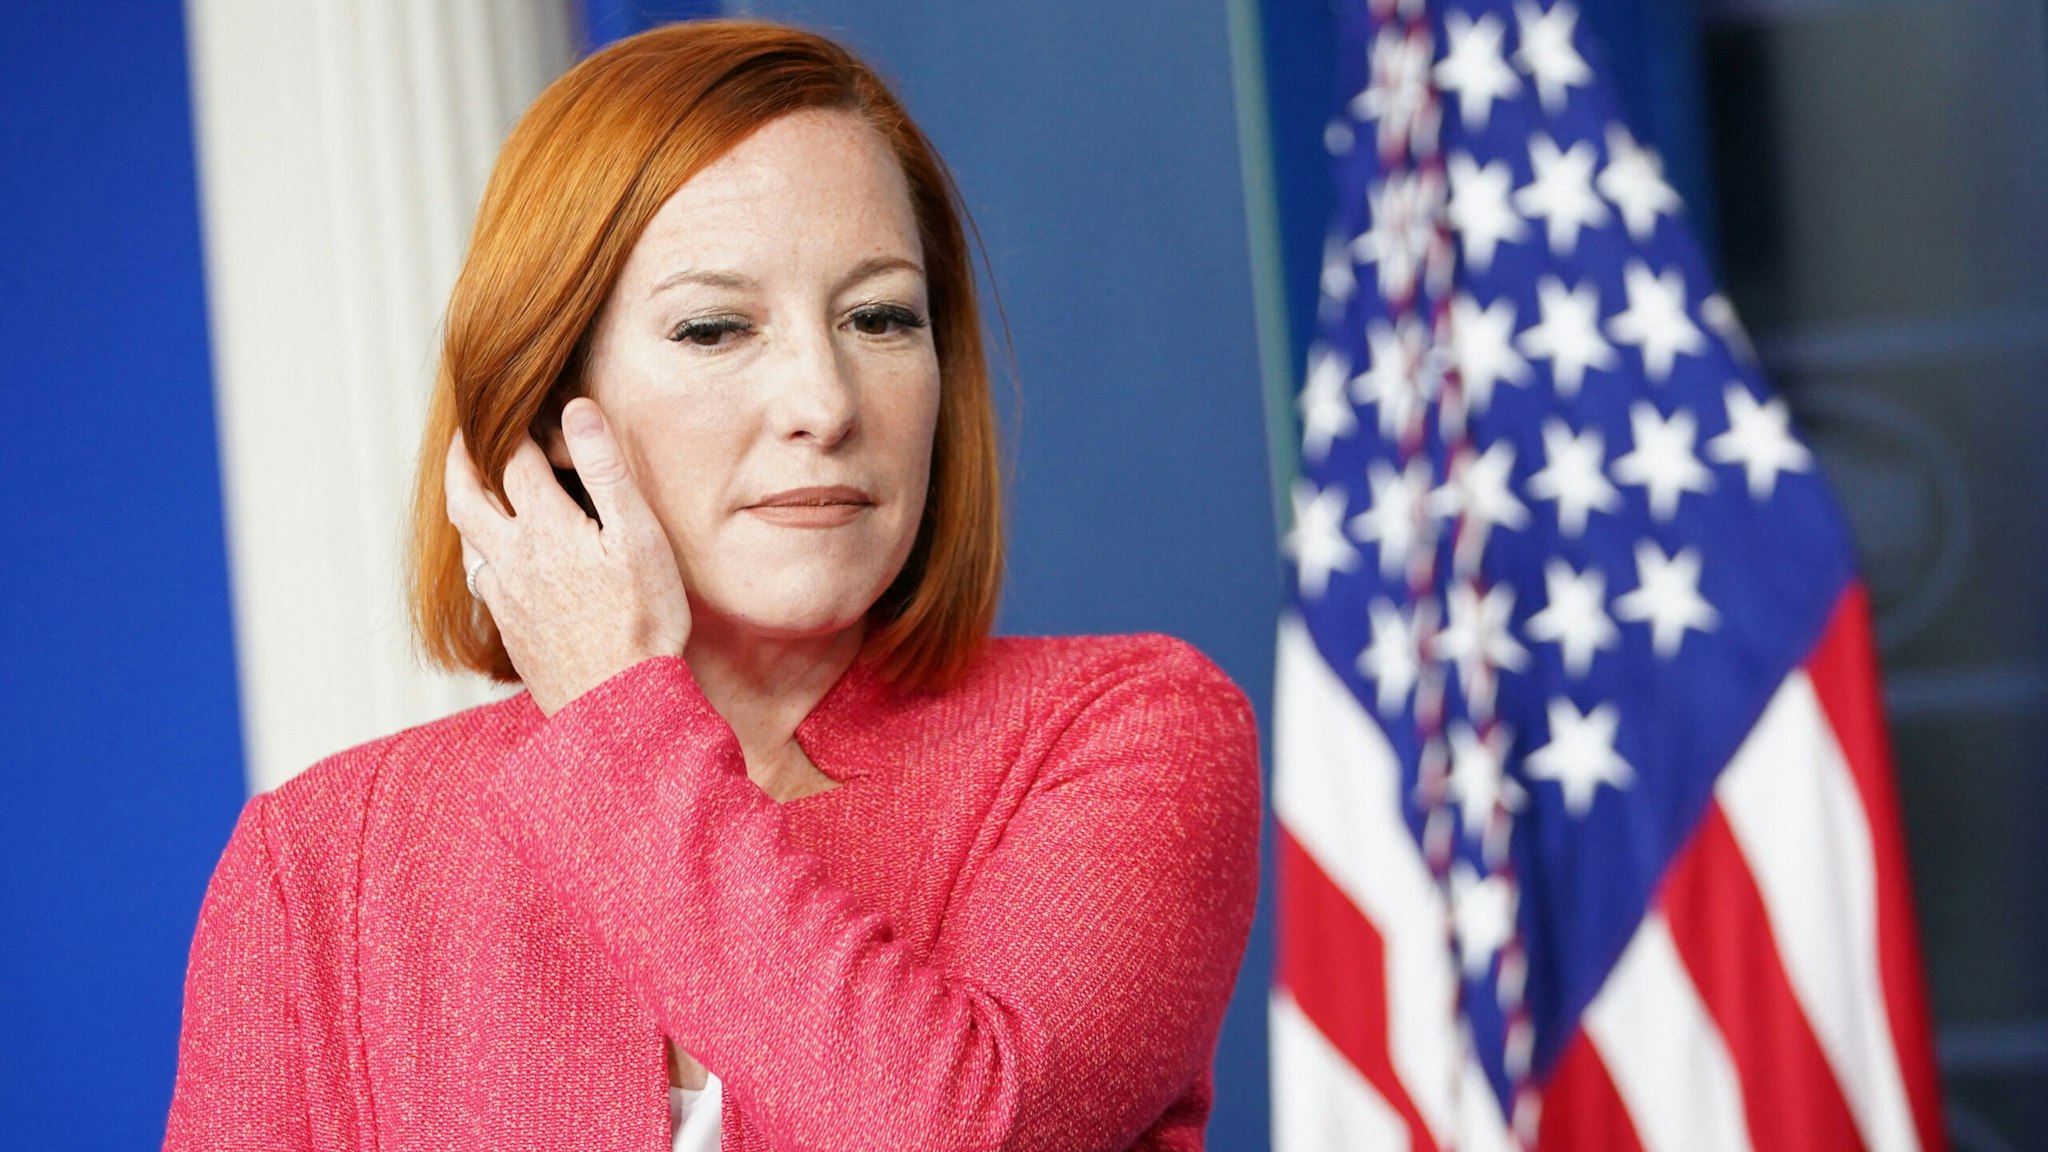 White House Press Secretary Jen Psaki speaks during the daily briefing in the Brady Briefing Room of the White House in Washington, DC on November 29, 2021.